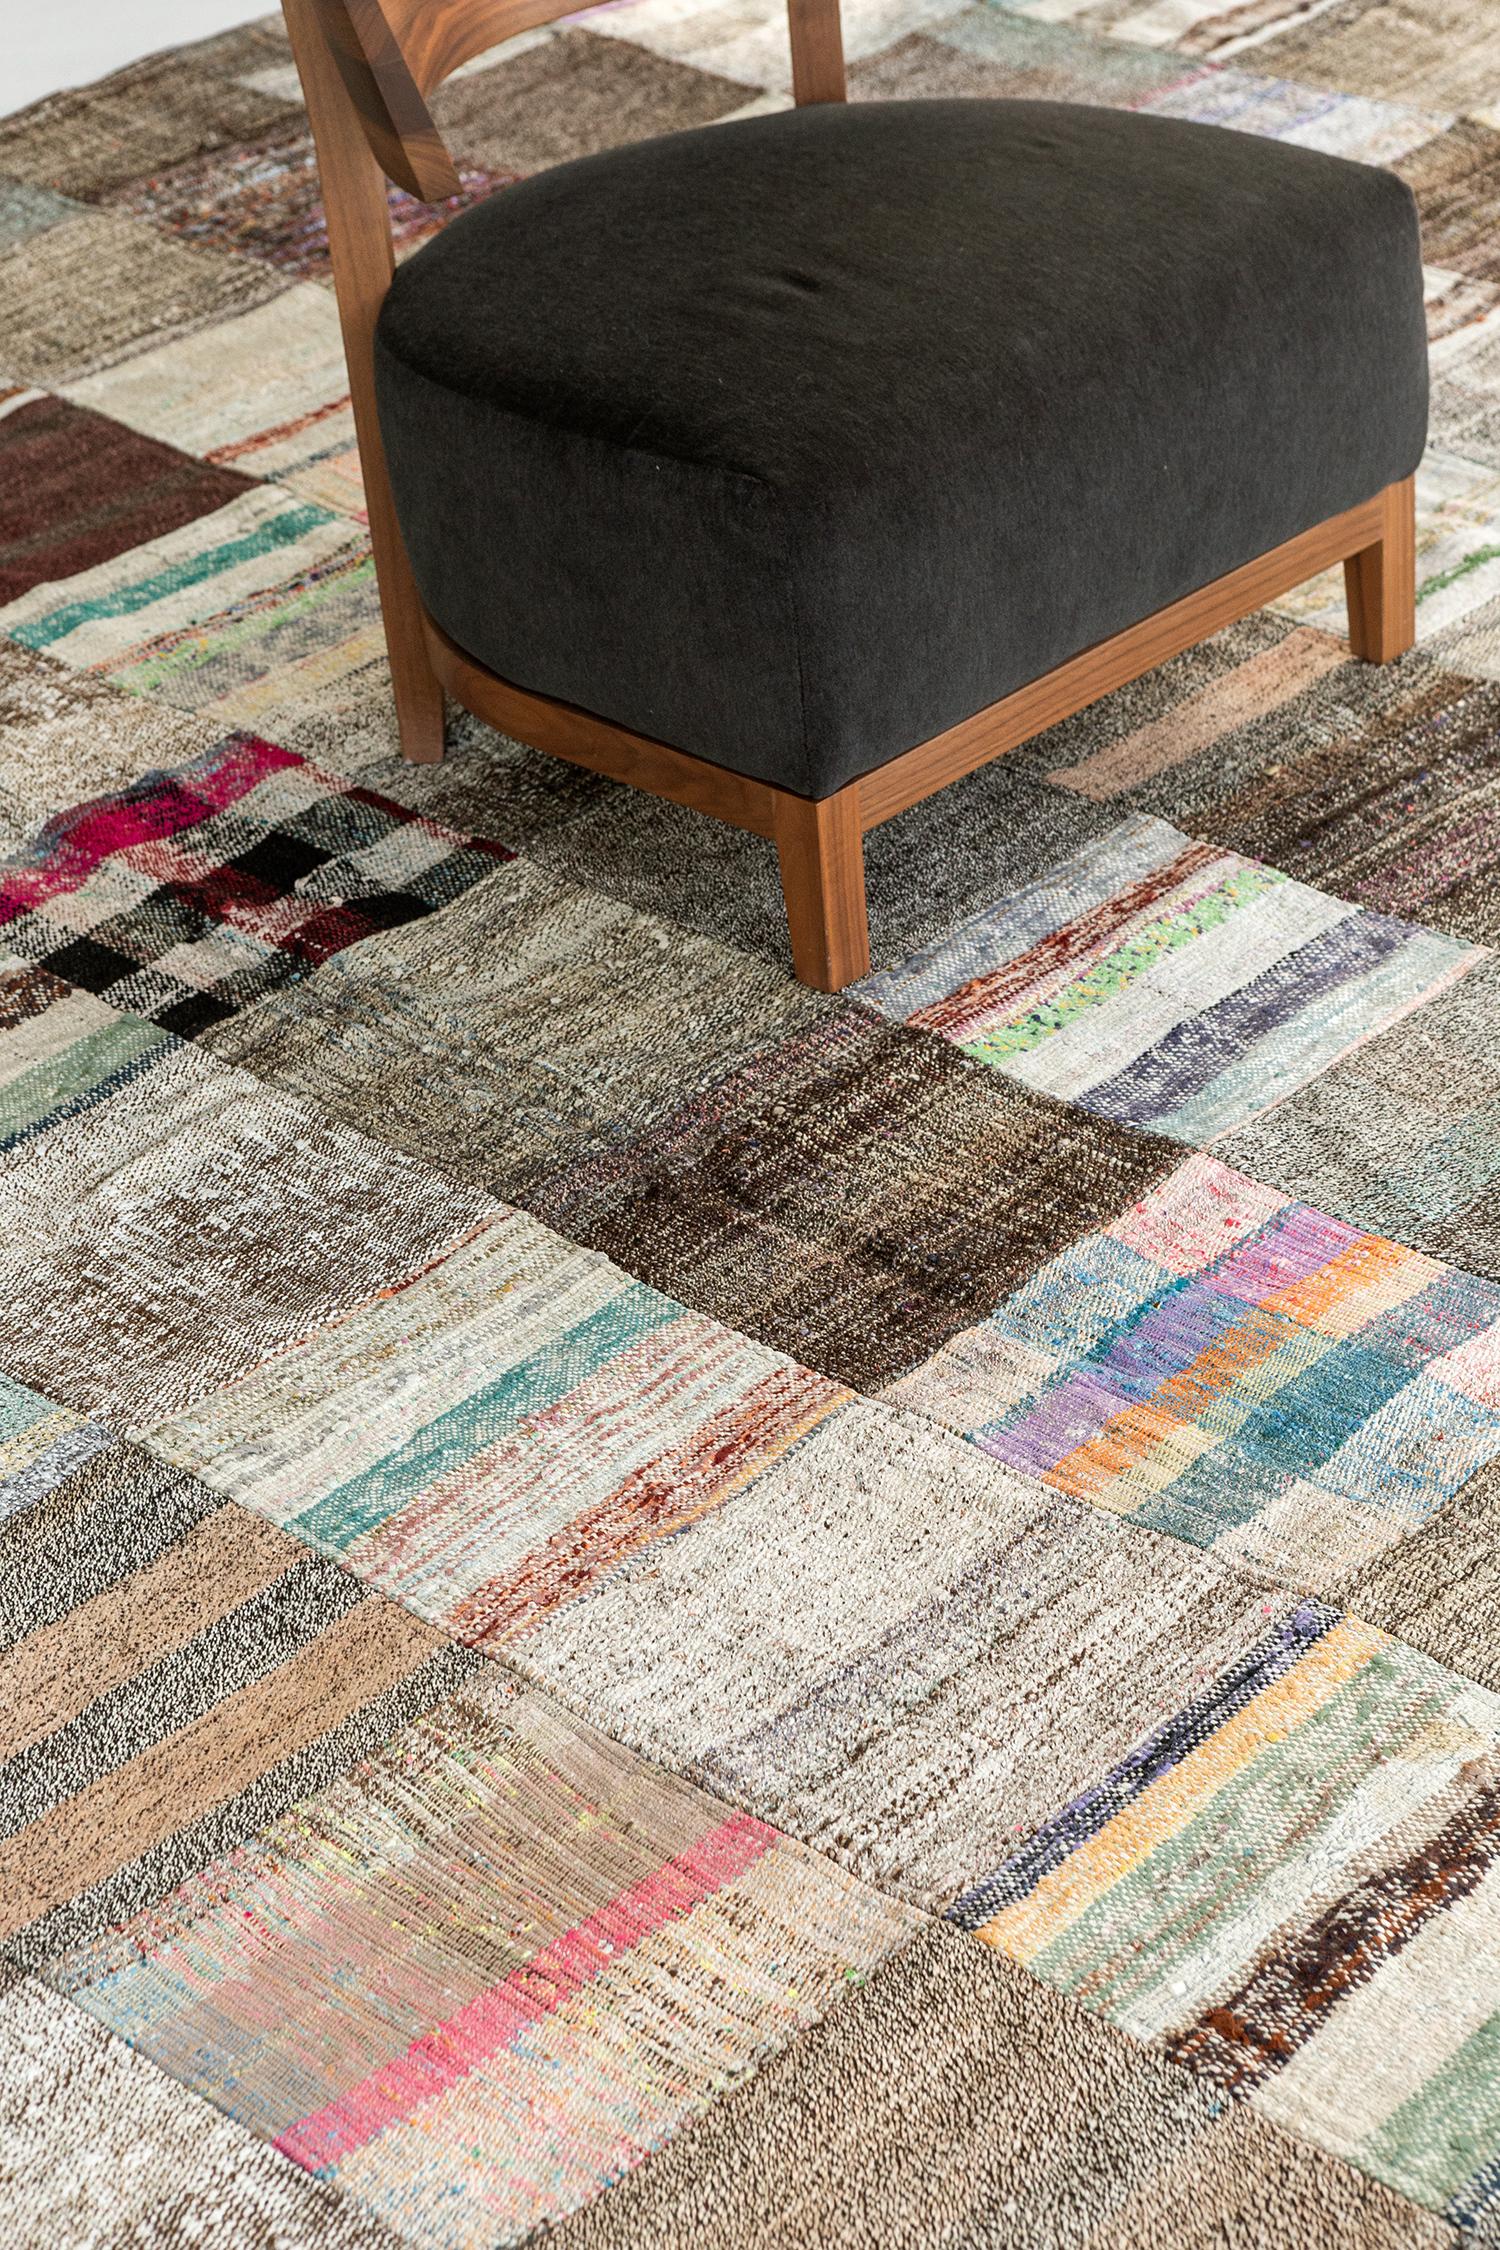 Displaying a charming and captivating appearance, this Vintage Turkish Kilim Patchwork rug is an embodiment of modern rustic preppy style. The patchwork pattern is composed of intricately designed variegated symmetrical squares composed of beautiful